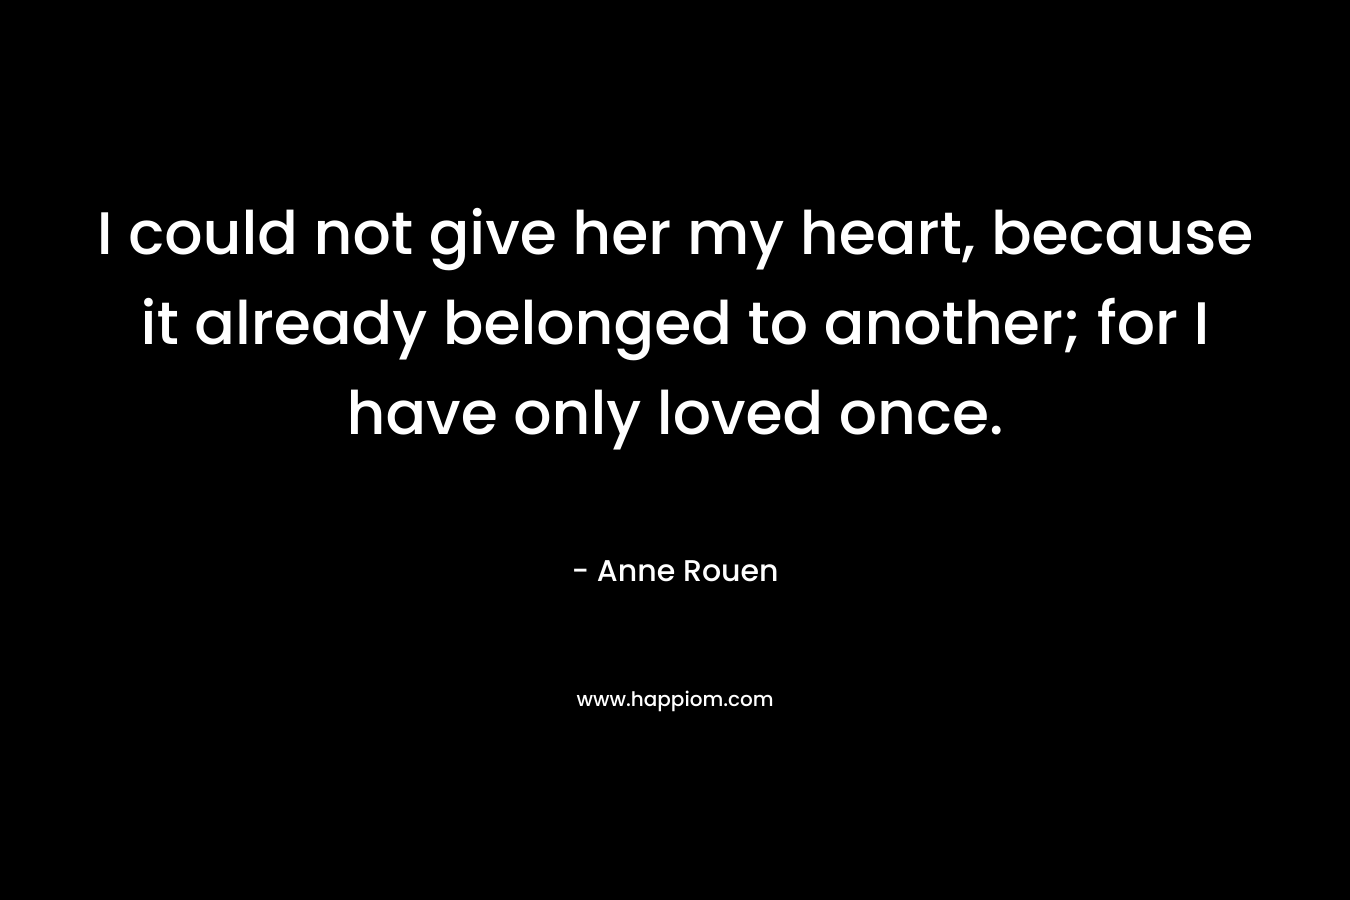 I could not give her my heart, because it already belonged to another; for I have only loved once. – Anne Rouen